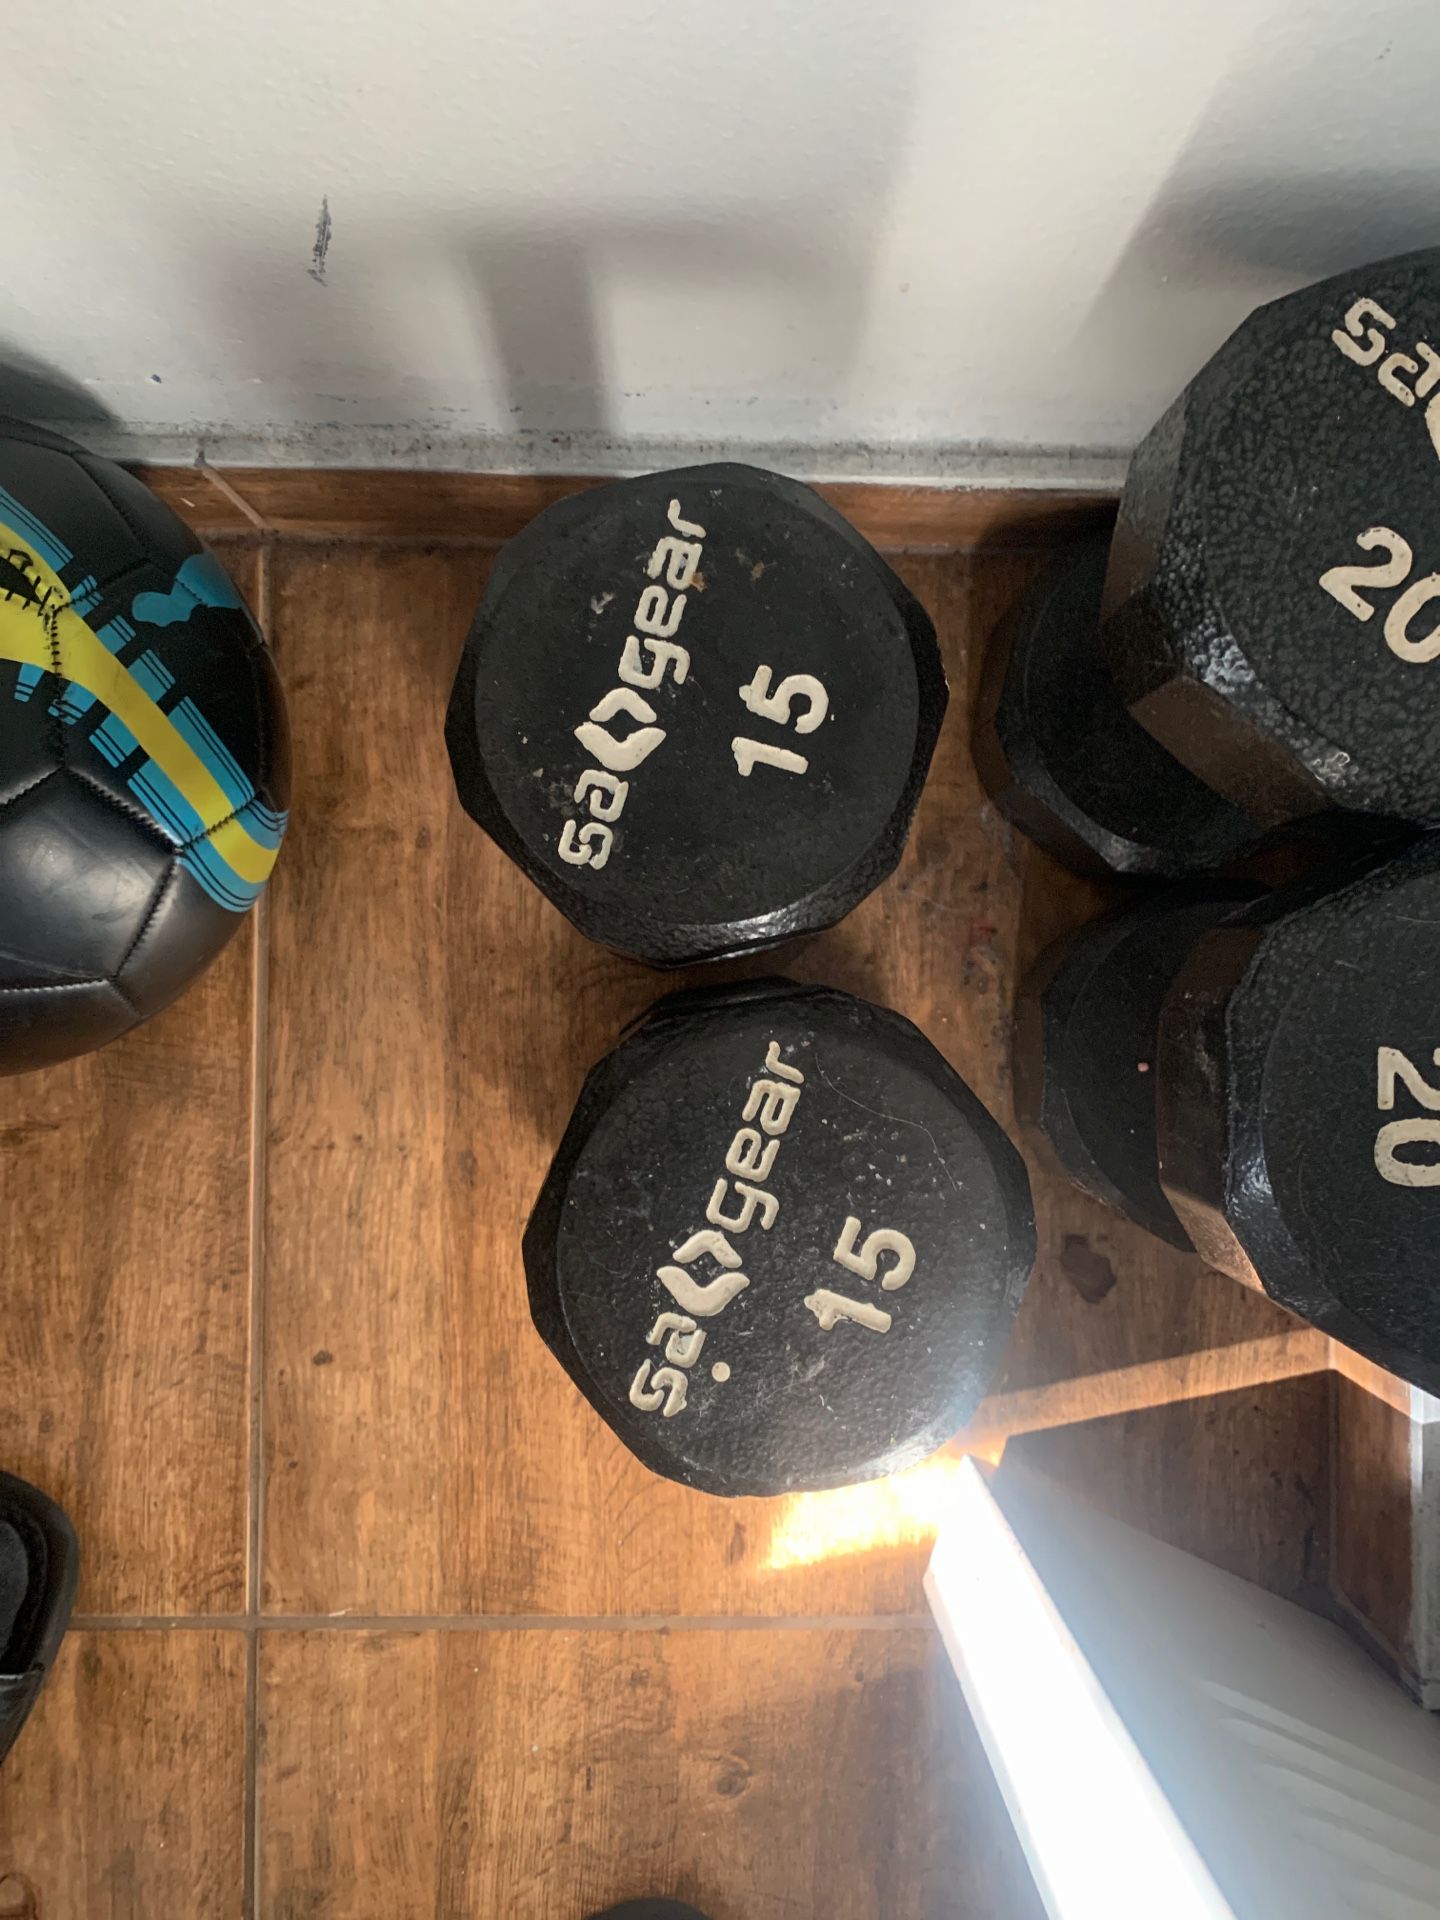 Dumbbells 15 pounds and 30 pounds sets